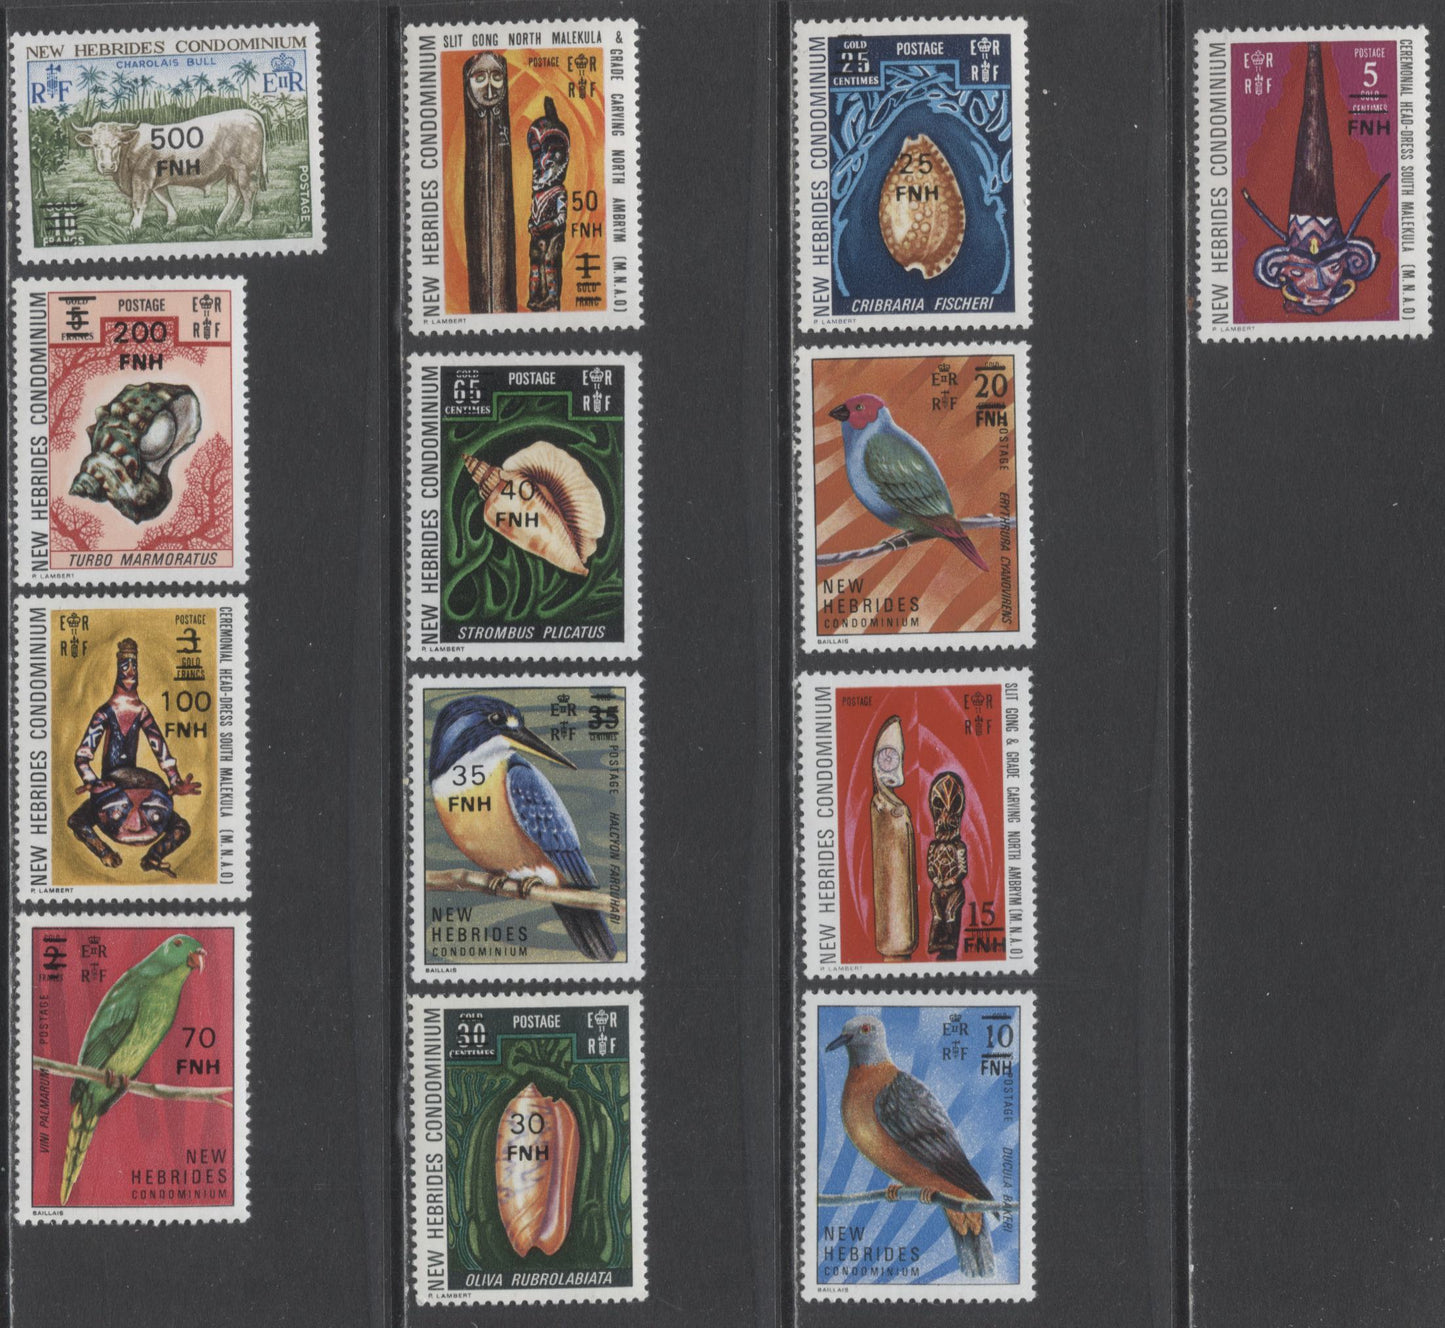 Lot 63 New Hebrides SC#217-229 1977 Surcharged Definitives, A VFNH Range Of Singles, 2017 Scott Cat. $39.95 USD, Click on Listing to See ALL Pictures